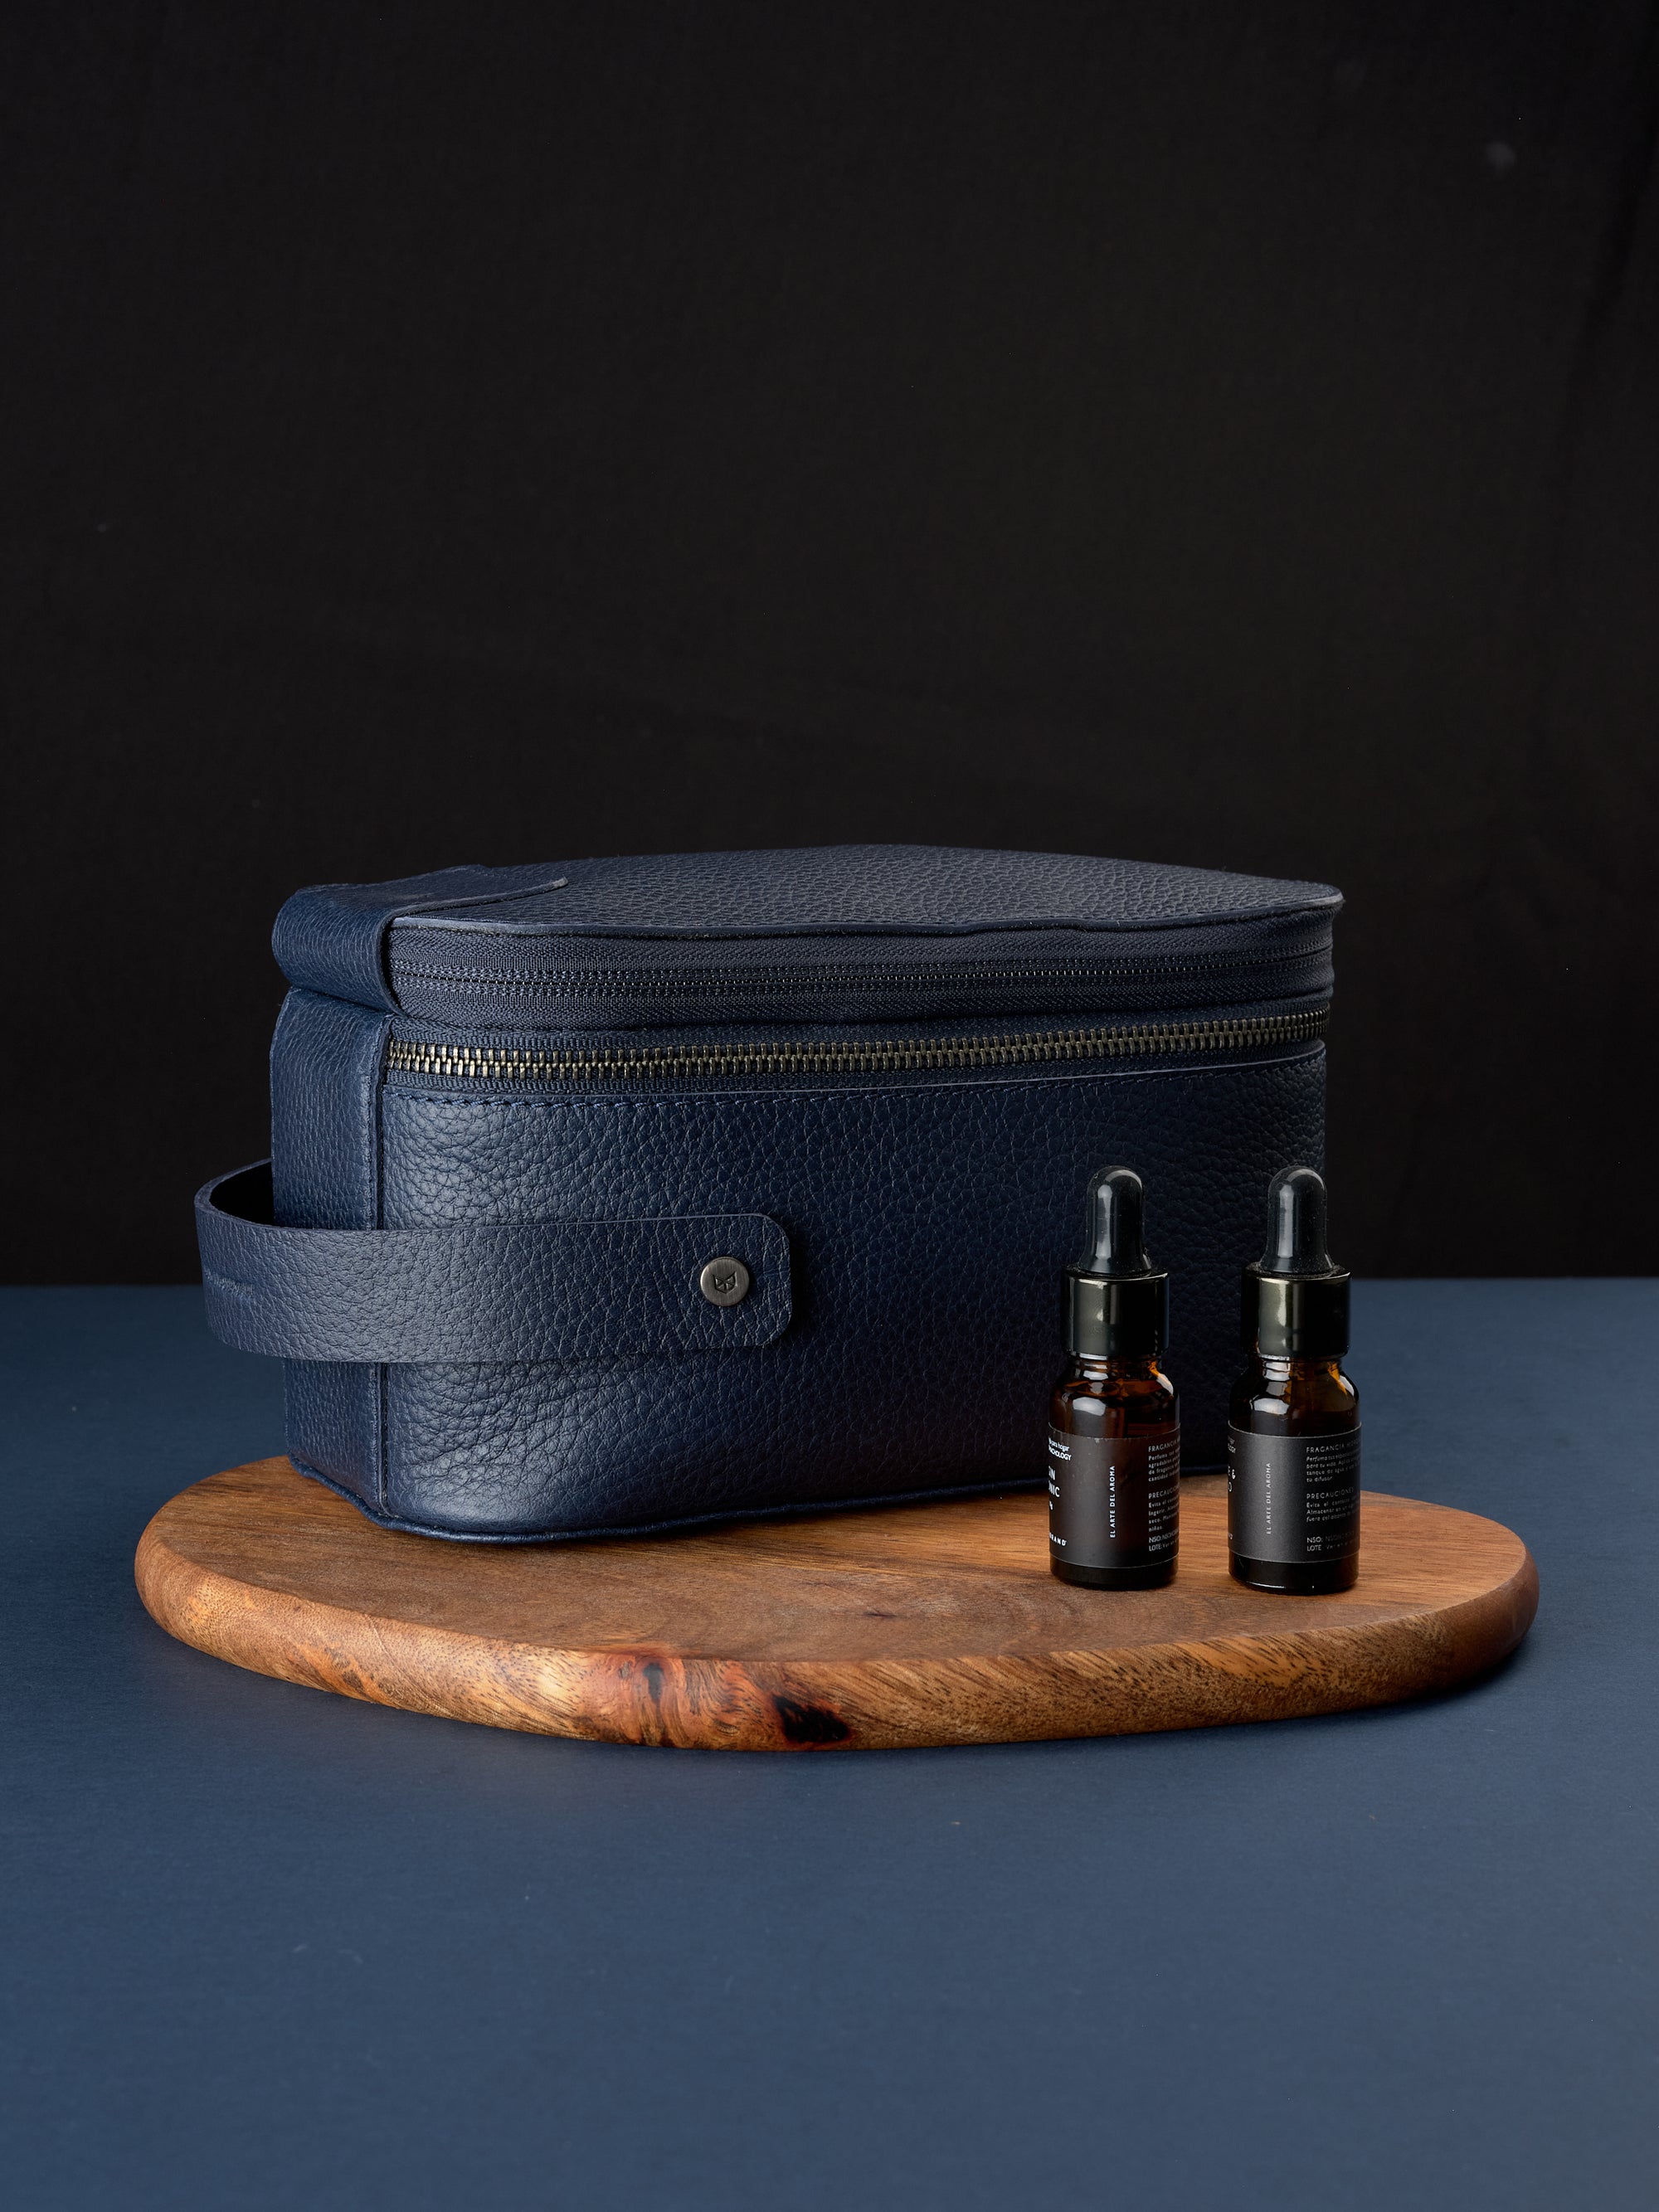 Carry on toiletry bag by Capra Leather